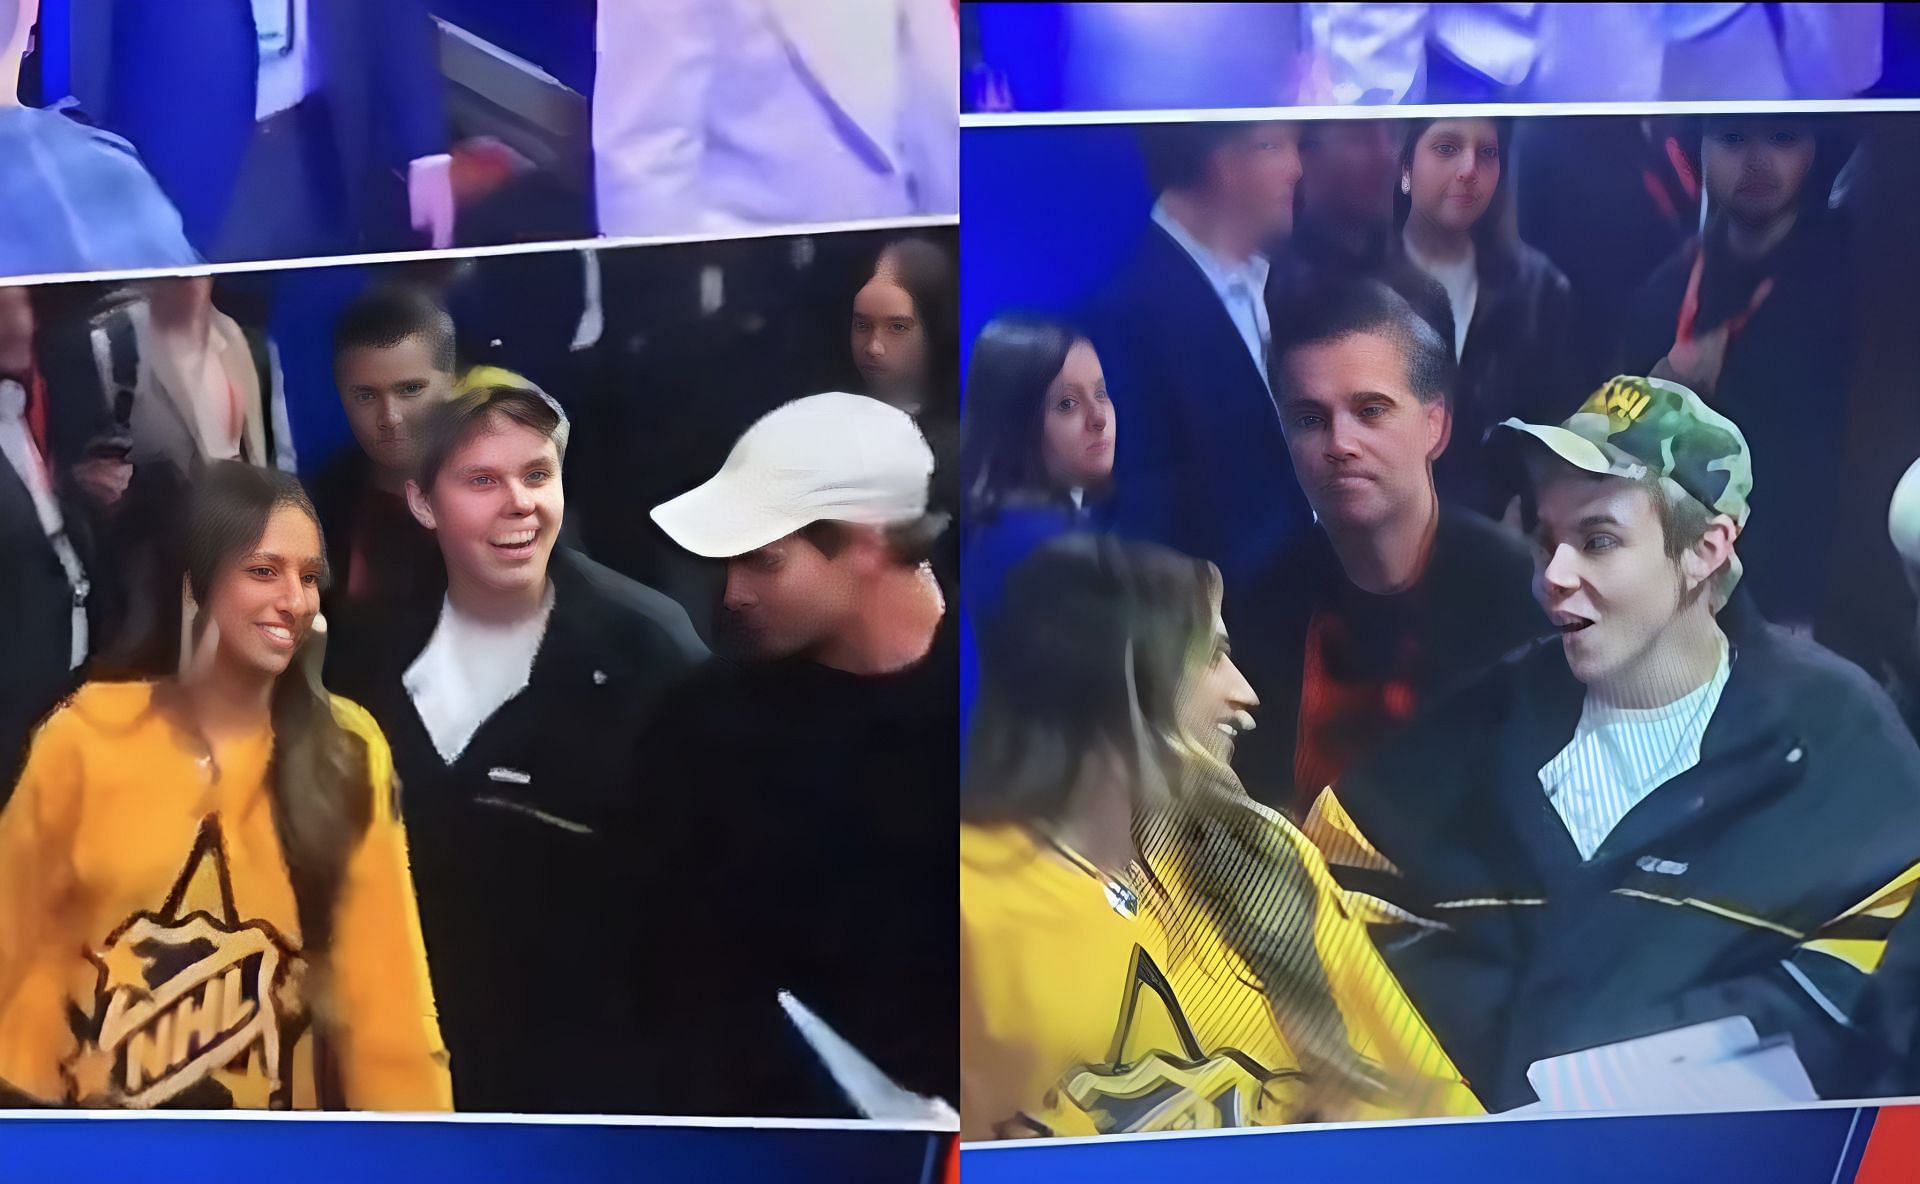 Tate McRae and Kid Laroi spotted together at 2024 NHL All-Star draft night, months after his breakup with model girlfriend Katarina Deme